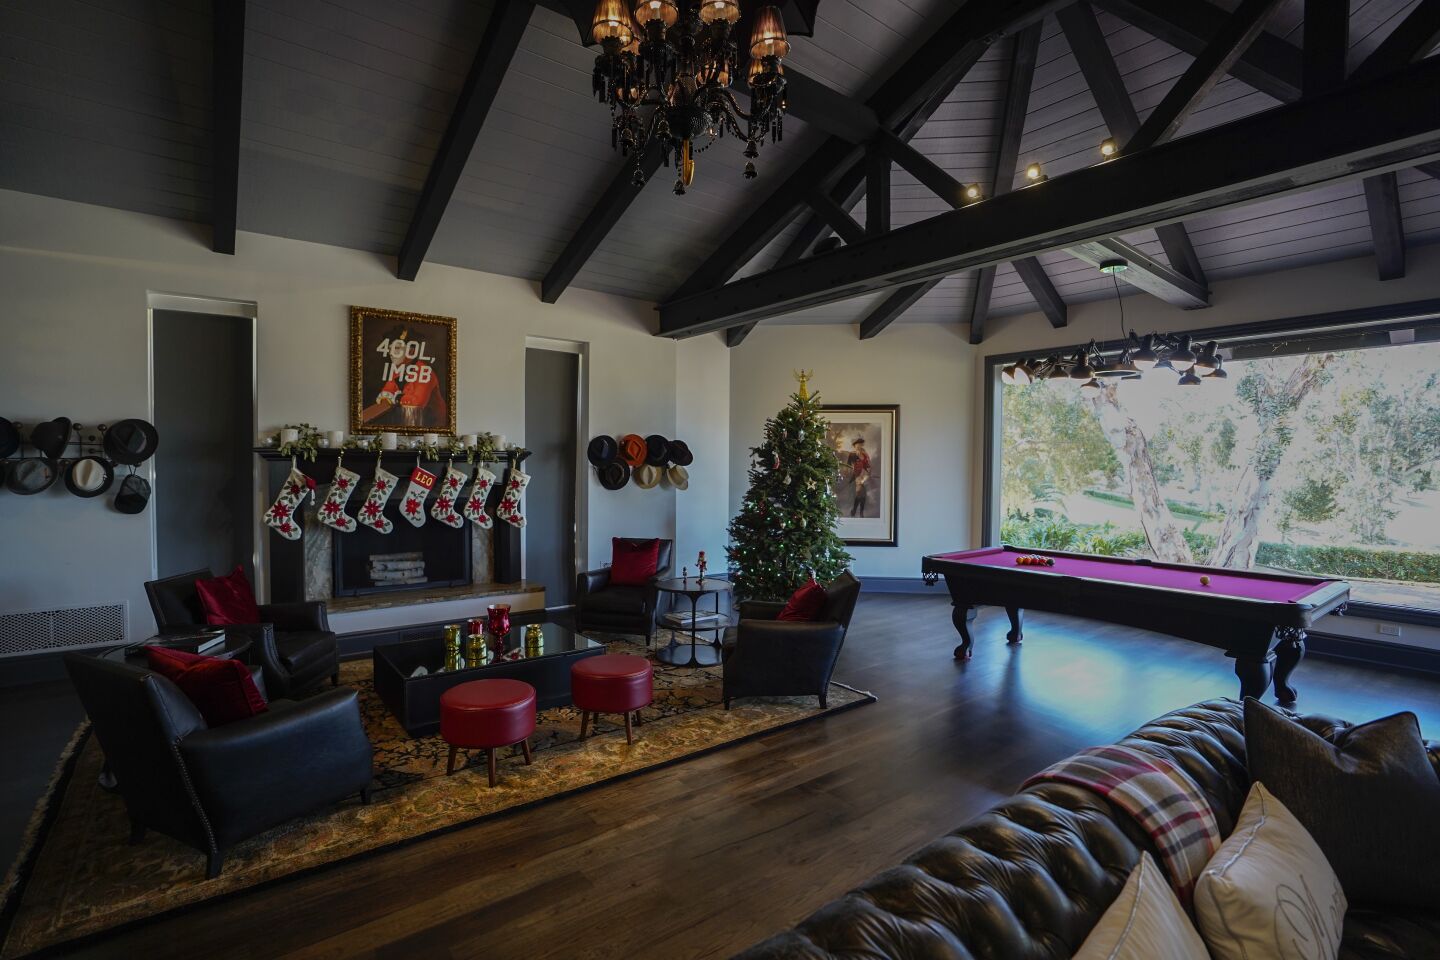 A newly built Rancho Santa Fe home on the market for $6 million comes with its own hidden speakeasy.